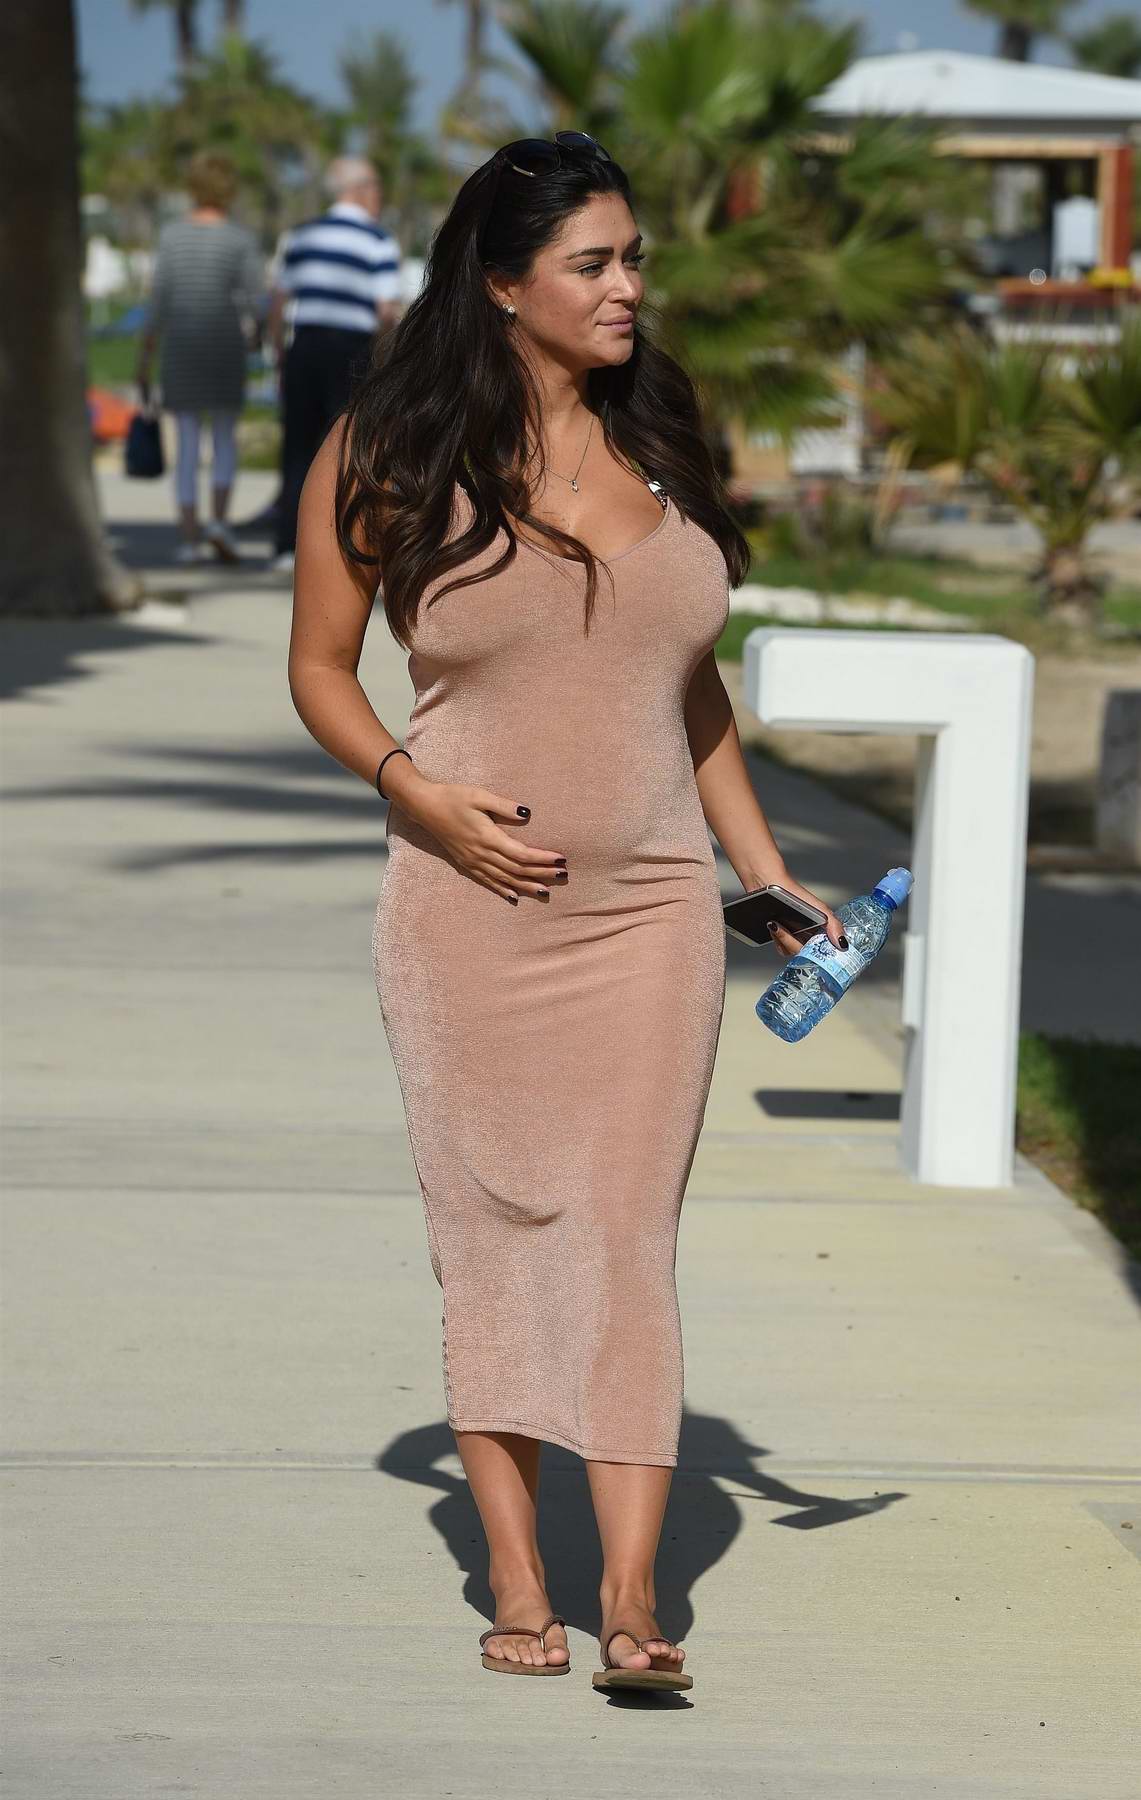 Casey Batchelor Shows Off Her Baby Bump While Taking A Stroll Along The